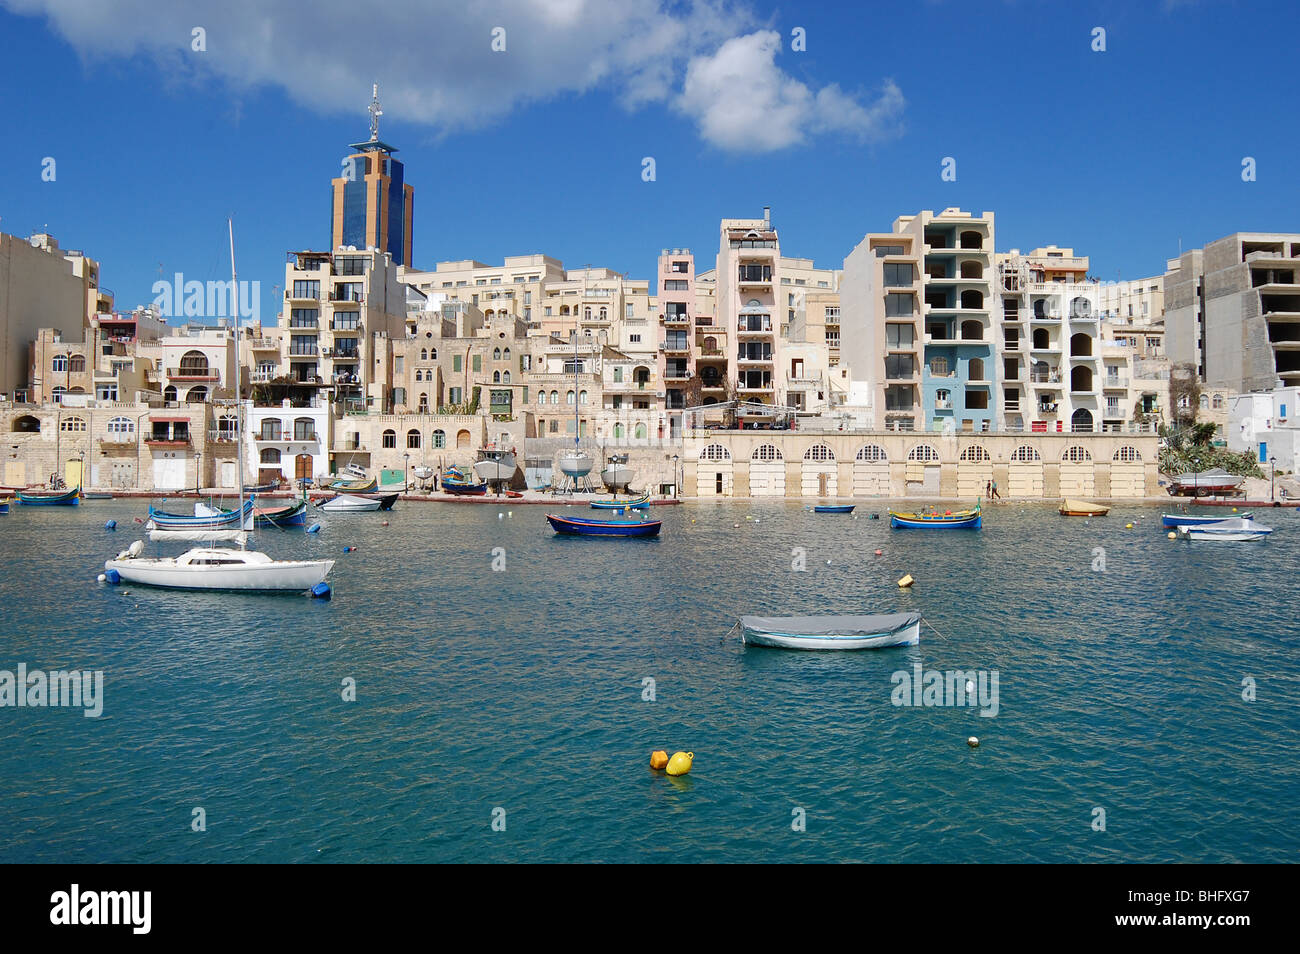 A view of St. Julians bay with buildings being constructed in the background overlooked by the Hilton hotel. Stock Photo